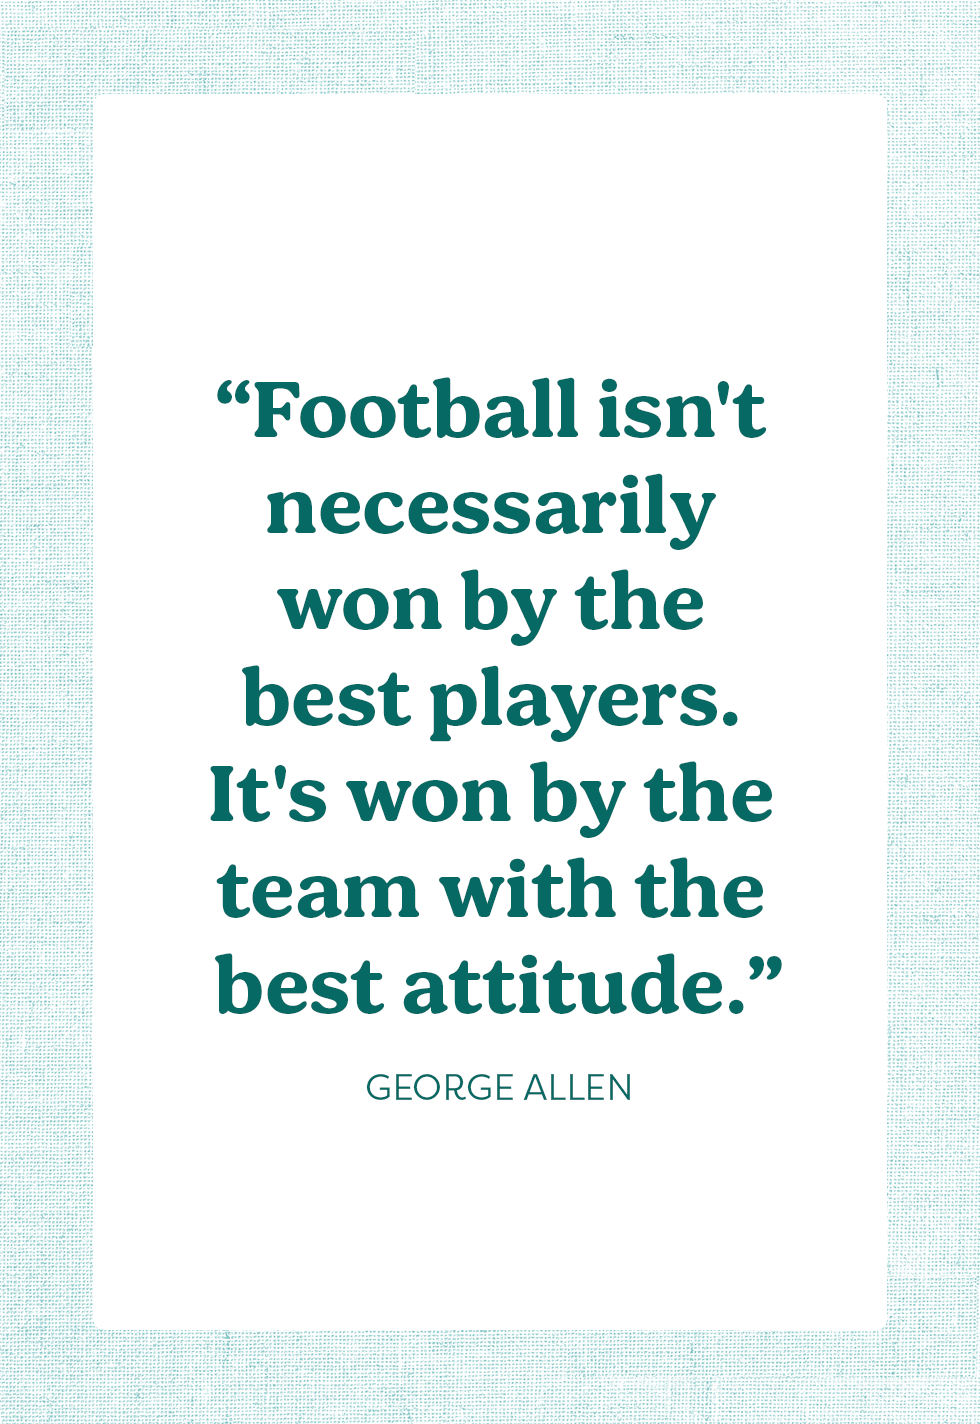 50 Football Quotes For Game Day Inspiration